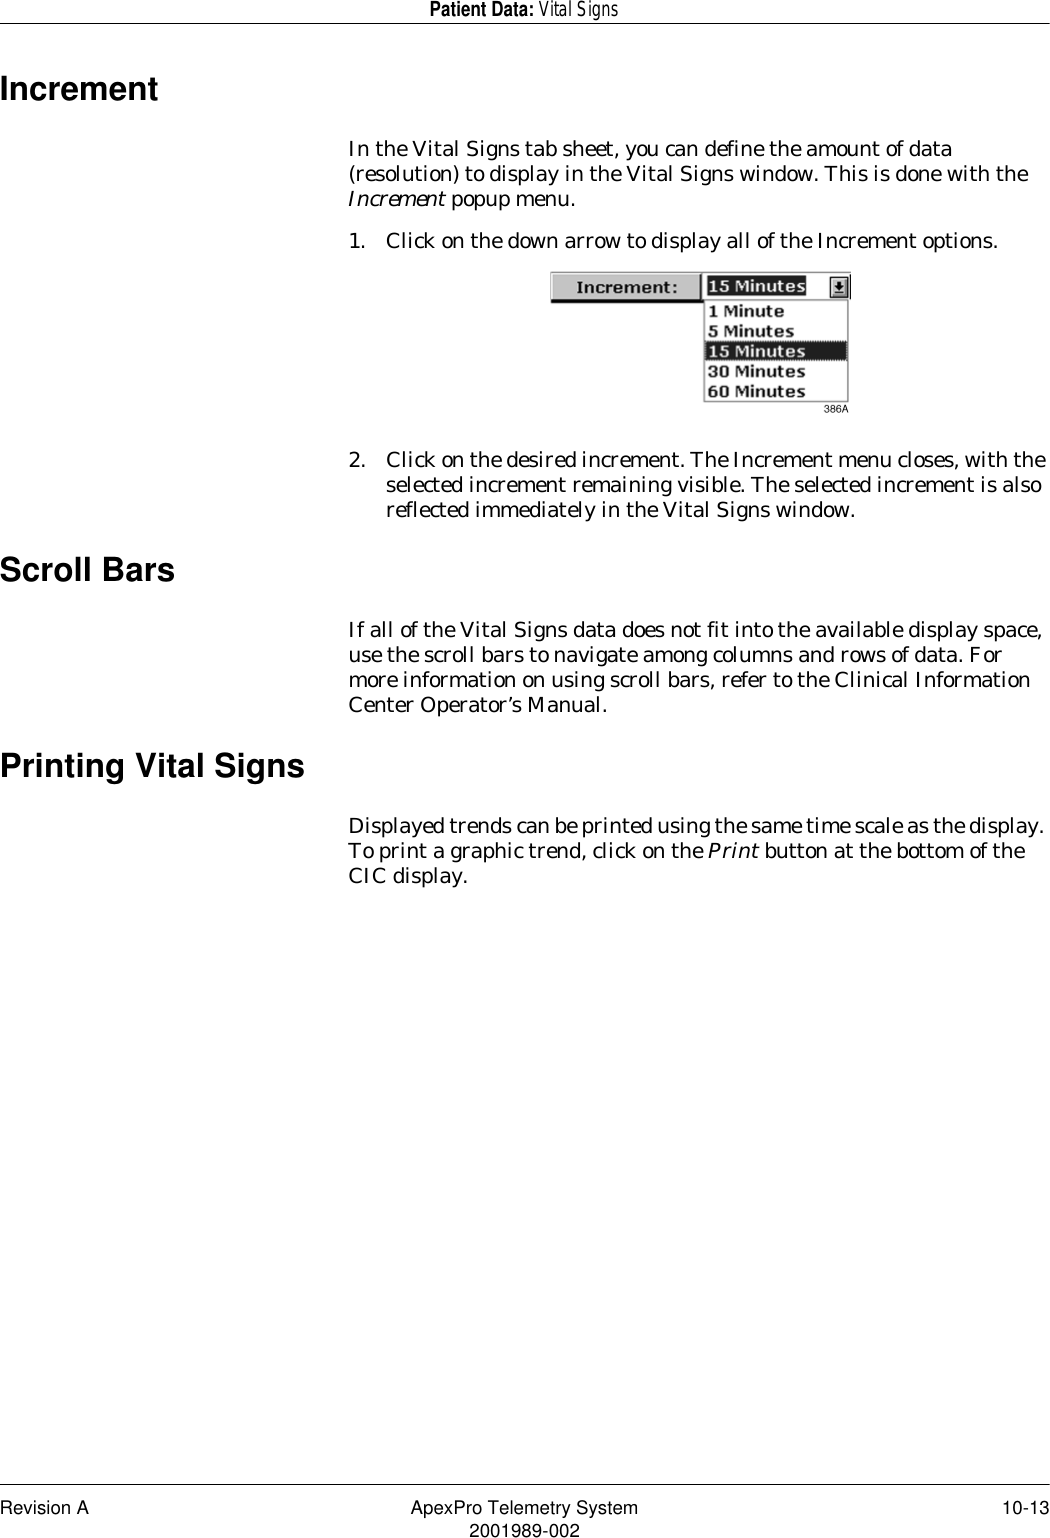 Revision A ApexPro Telemetry System 10-132001989-002Patient Data: Vital SignsIncrementIn the Vital Signs tab sheet, you can define the amount of data (resolution) to display in the Vital Signs window. This is done with the Increment popup menu.1. Click on the down arrow to display all of the Increment options.2. Click on the desired increment. The Increment menu closes, with the selected increment remaining visible. The selected increment is also reflected immediately in the Vital Signs window.Scroll BarsIf all of the Vital Signs data does not fit into the available display space, use the scroll bars to navigate among columns and rows of data. For more information on using scroll bars, refer to the Clinical Information Center Operator’s Manual.Printing Vital SignsDisplayed trends can be printed using the same time scale as the display. To print a graphic trend, click on the Print button at the bottom of the CIC display.